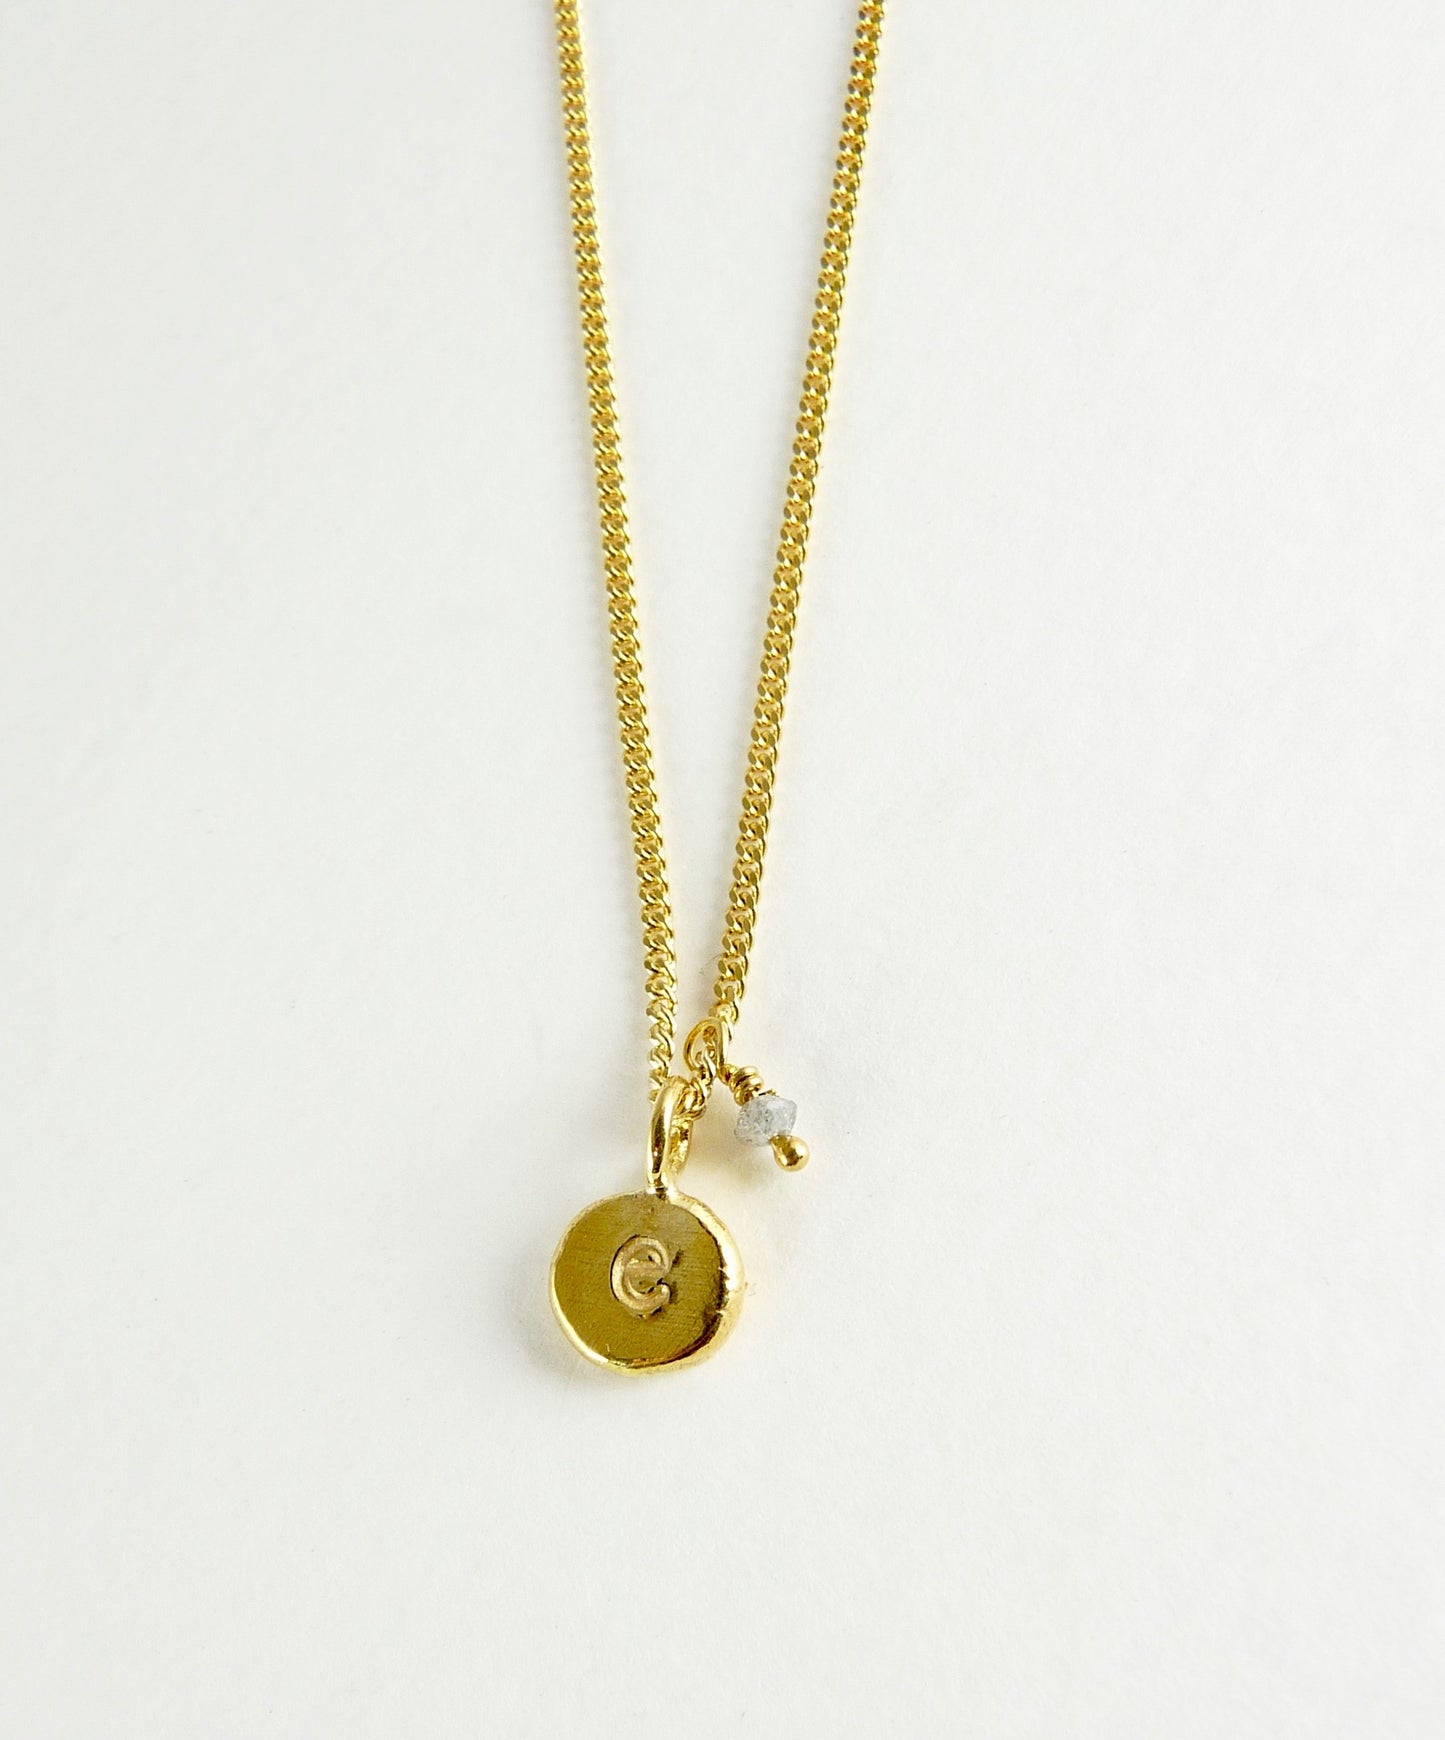 Initial & Birthstone Delicate Necklace